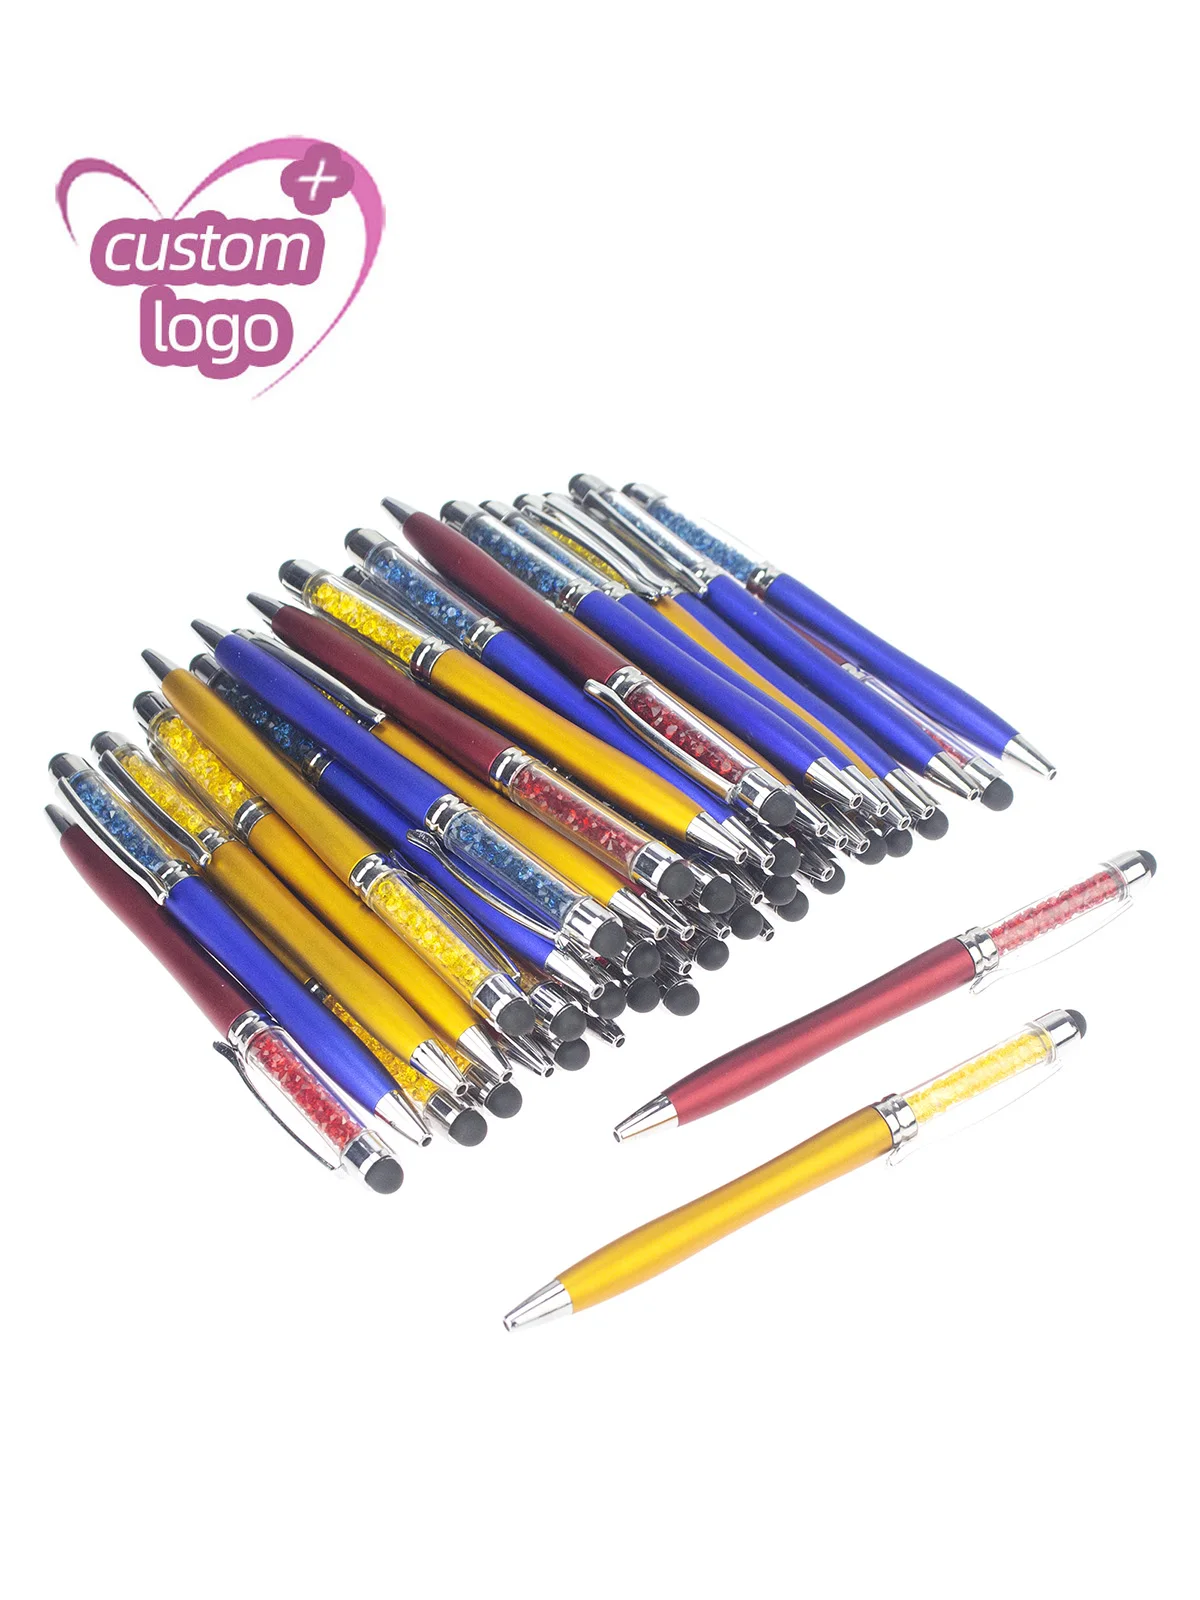 lot 50pcs Color Crystal Stylus Ball Pen Touch Screen Ballpoint Pen Custom Logo Pen Promotional Gift Pen Personalized Giveaway